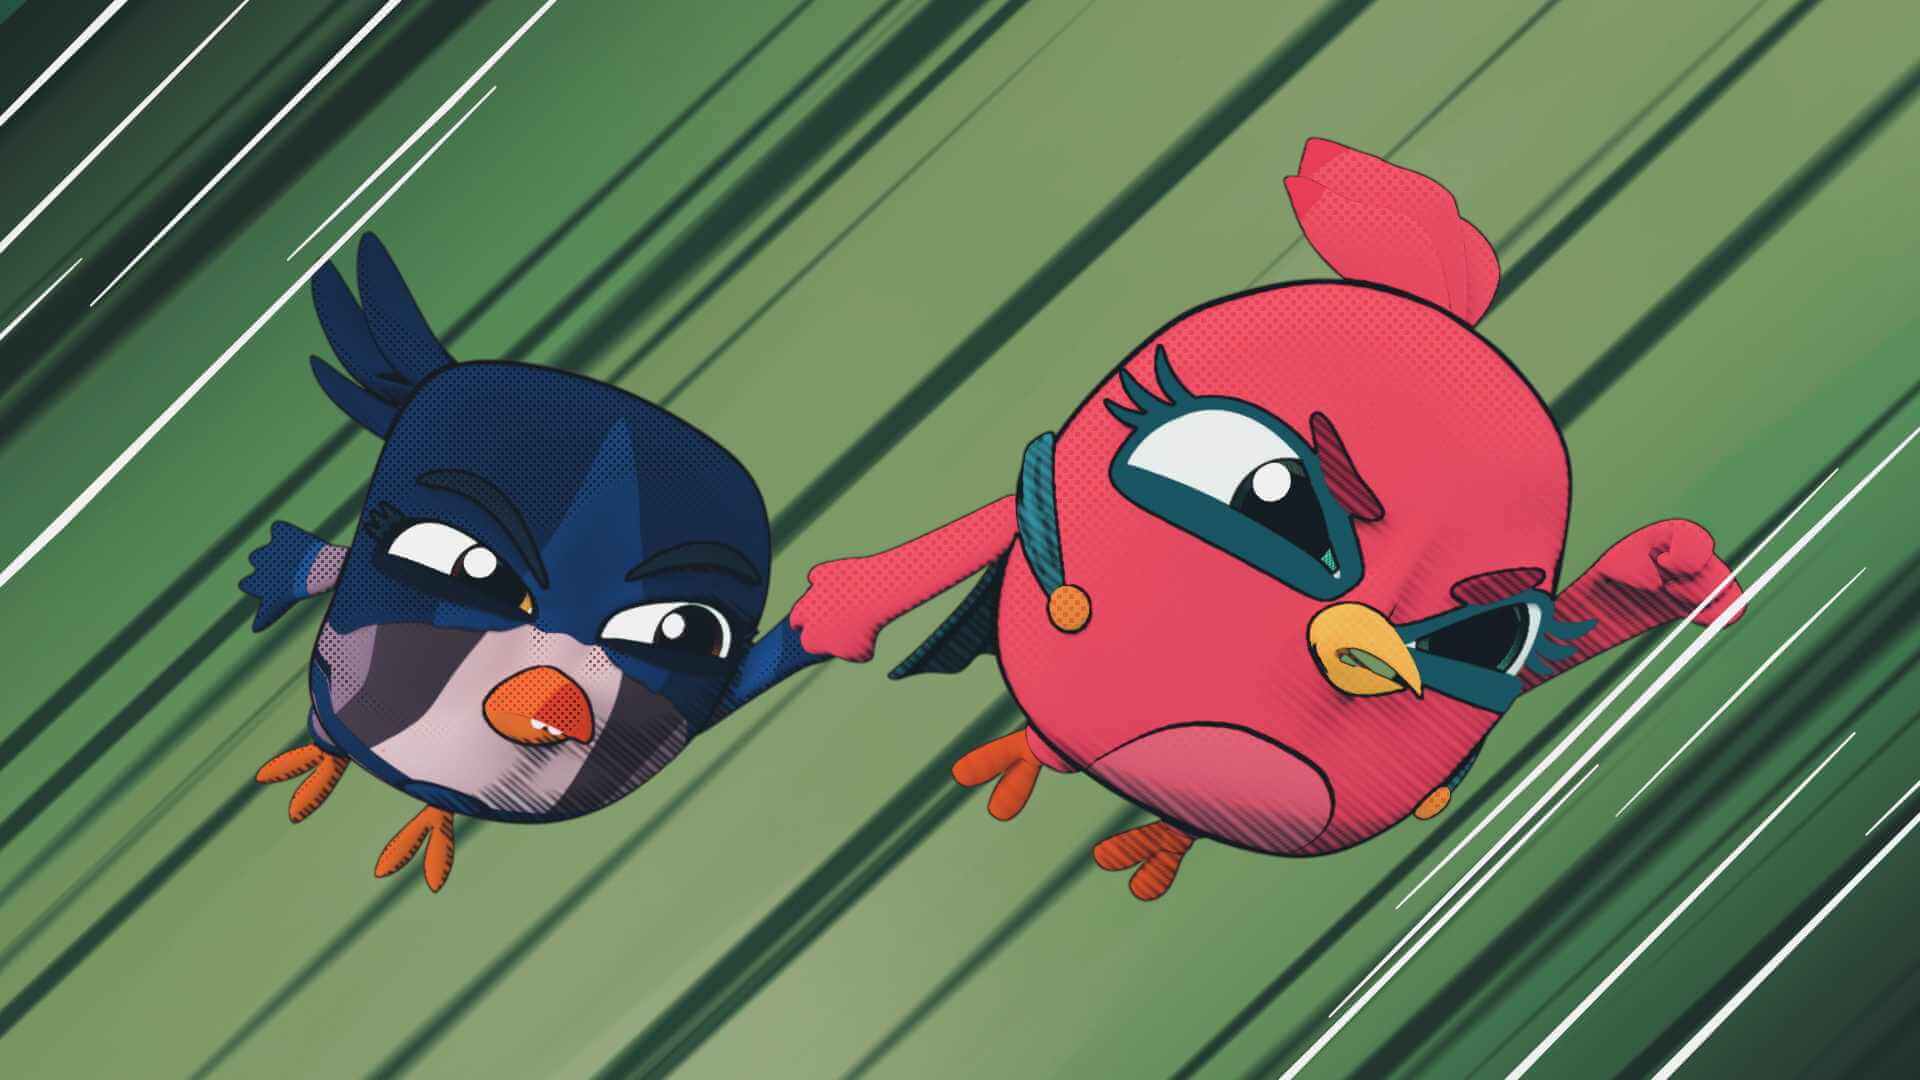 ANGRY-BIRDS-BUBBLE-TROUBLE-BANNER-LEPOP